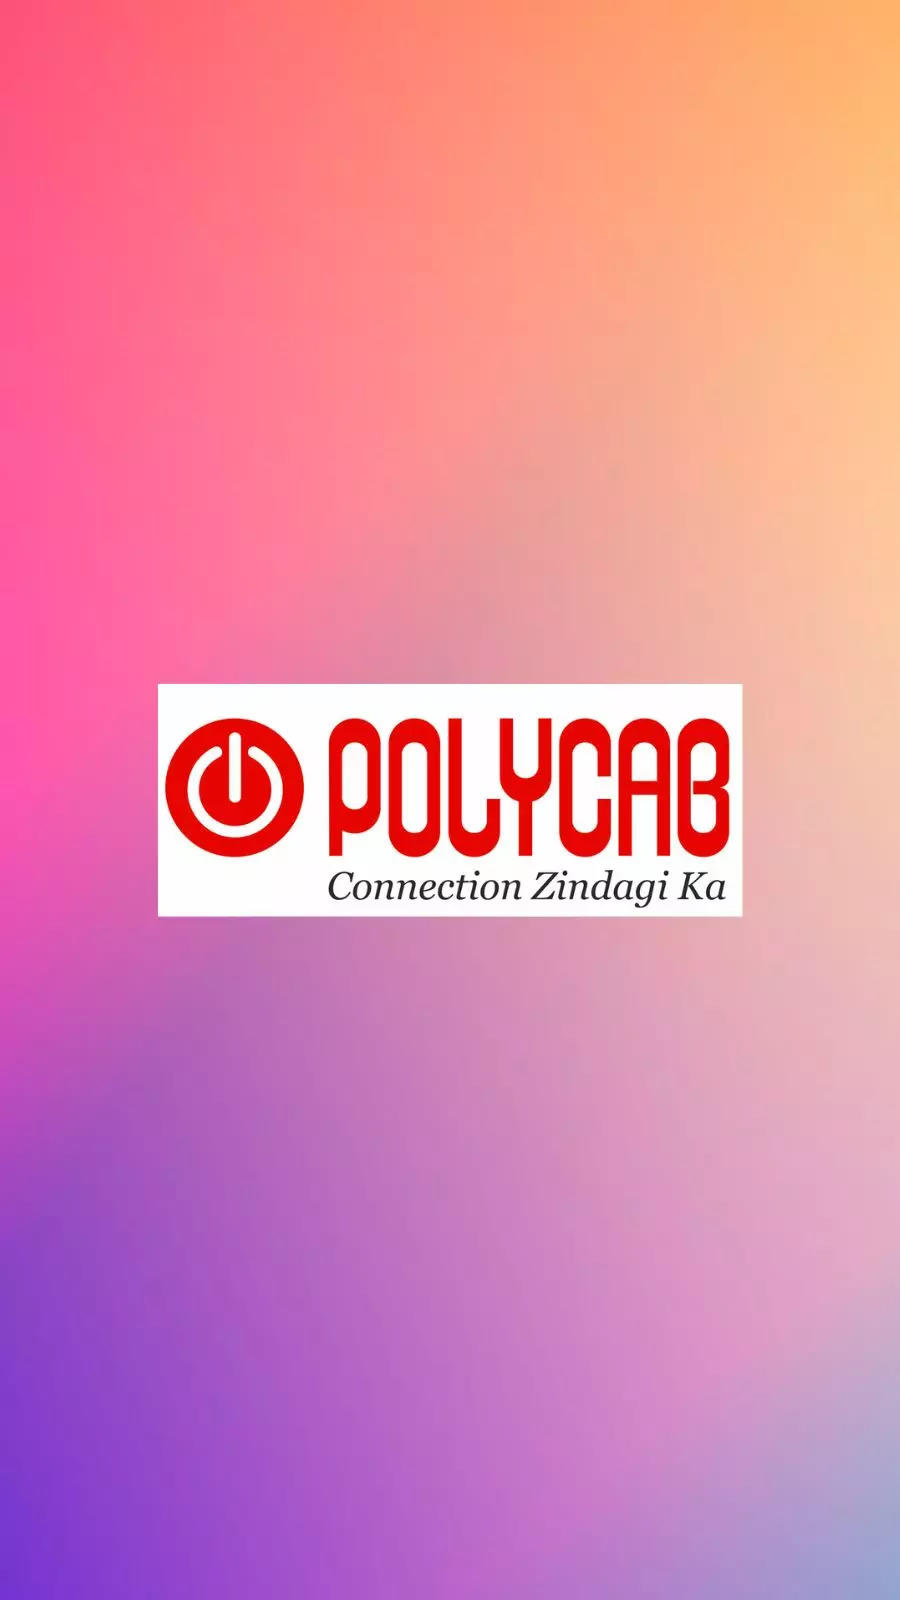 Extra safe wire means extra safe dreams says Polycab India